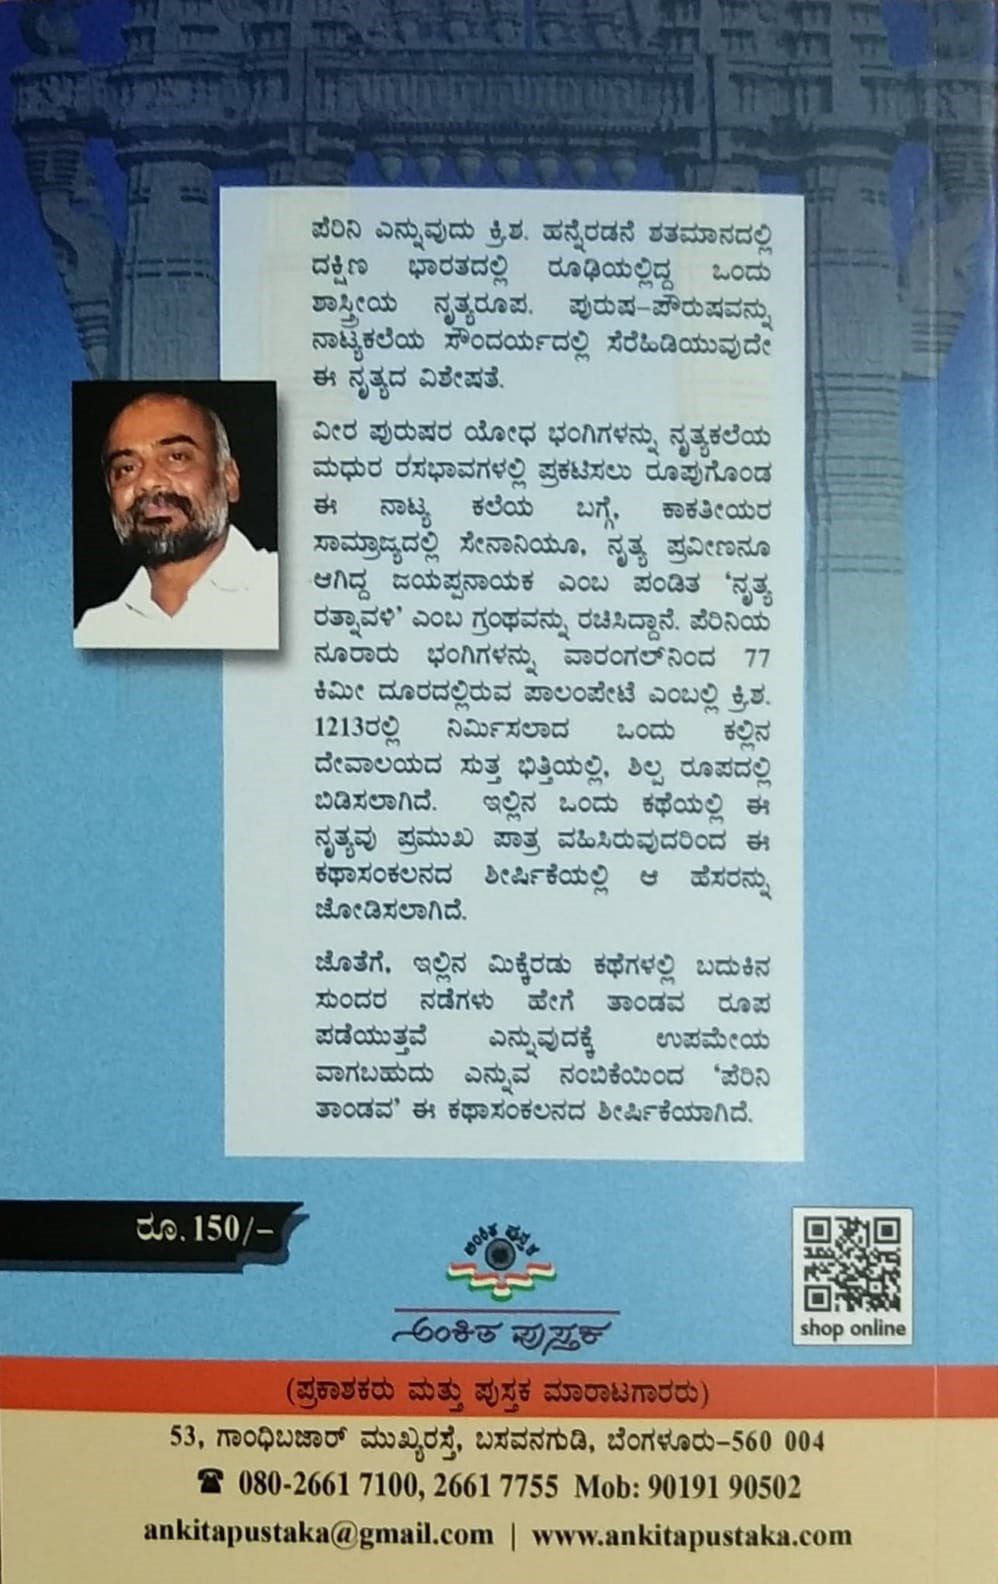 'Perini Tandava' is a book of Collection of Short Stories whic is written by Dr. K. N. Ganeshayya and Published by Ankita Pustaka